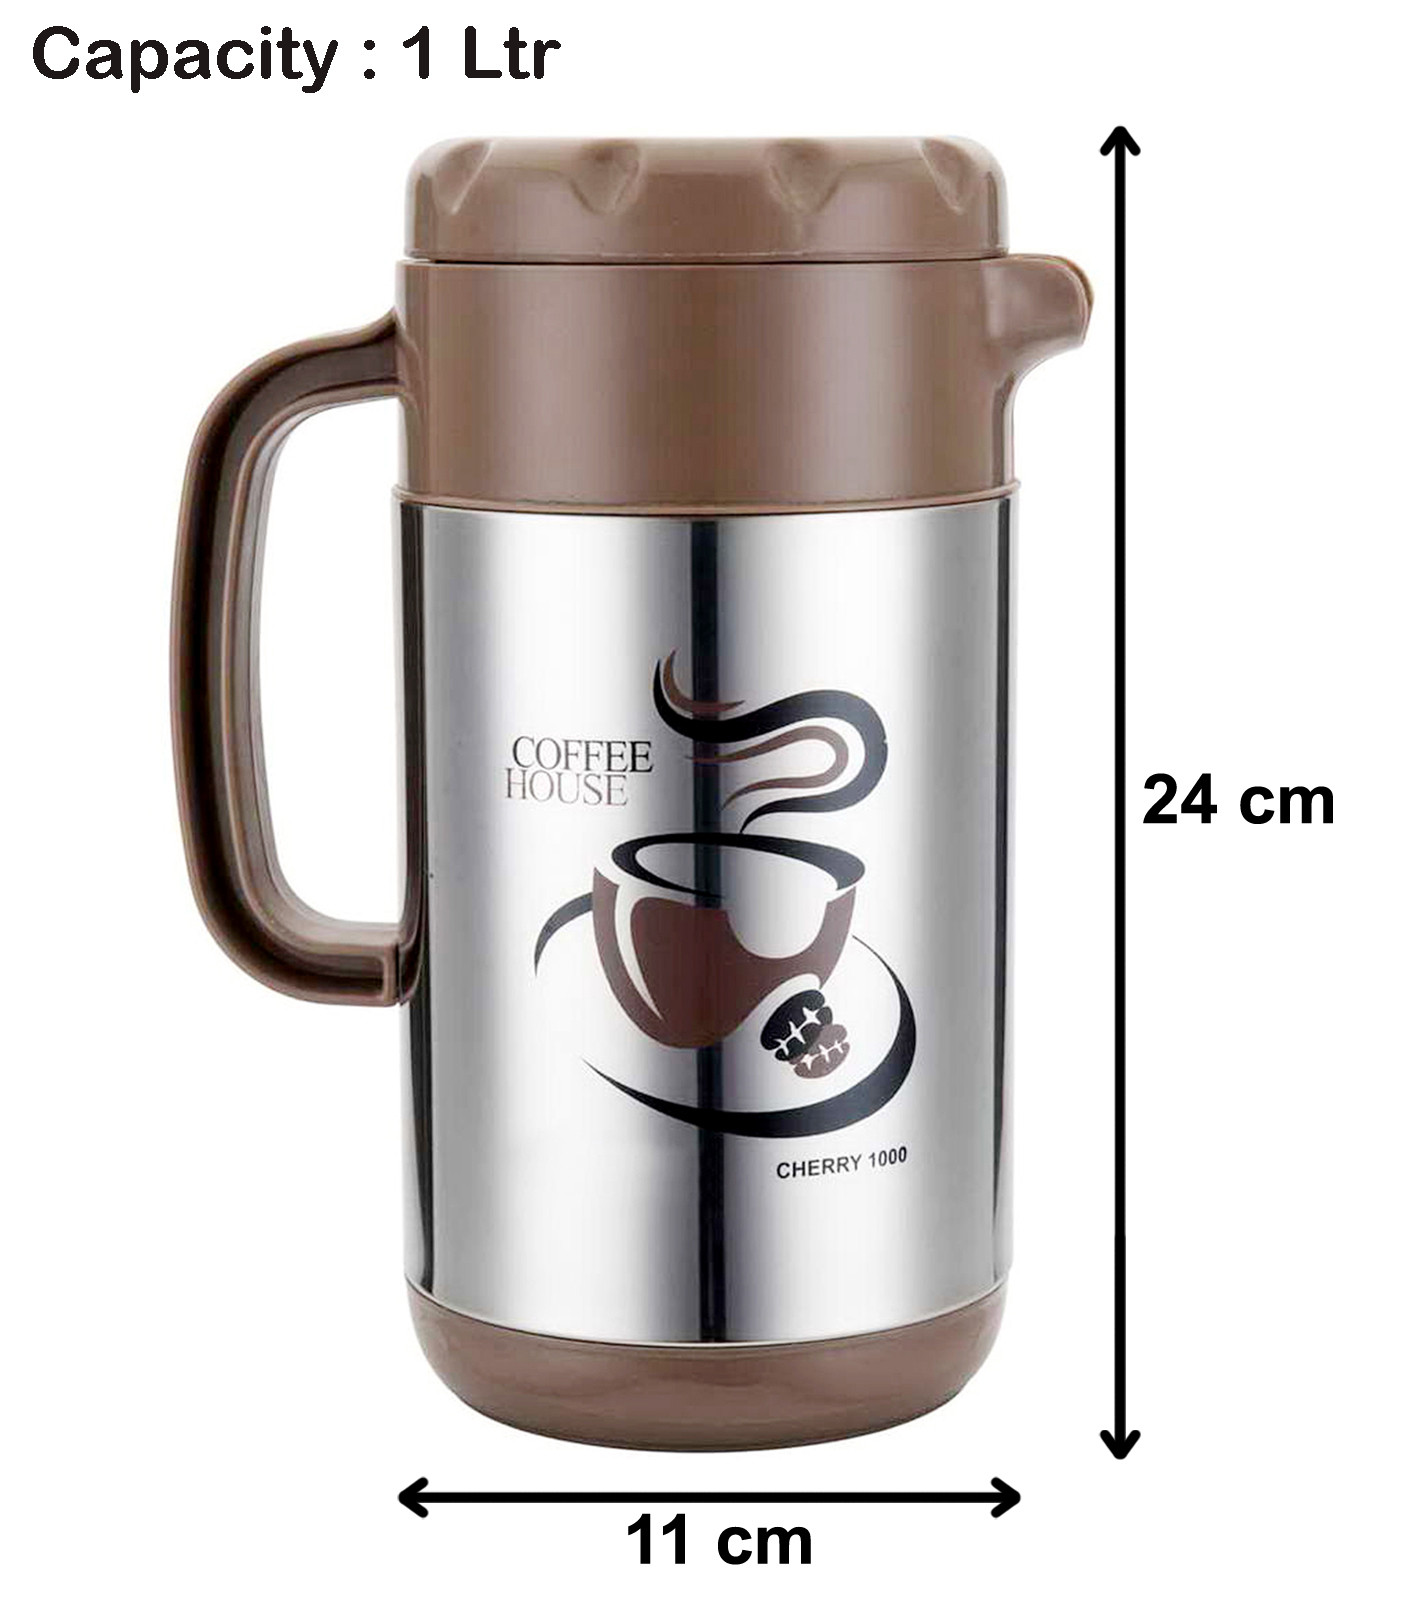 Kuber Industries Stainless Thermo Steel Double-Wall Vacuum Insulated Coffee,Tea, Beverage Pot/Kettle, 1Ltr. (Grey)-HS42KUBMART25101